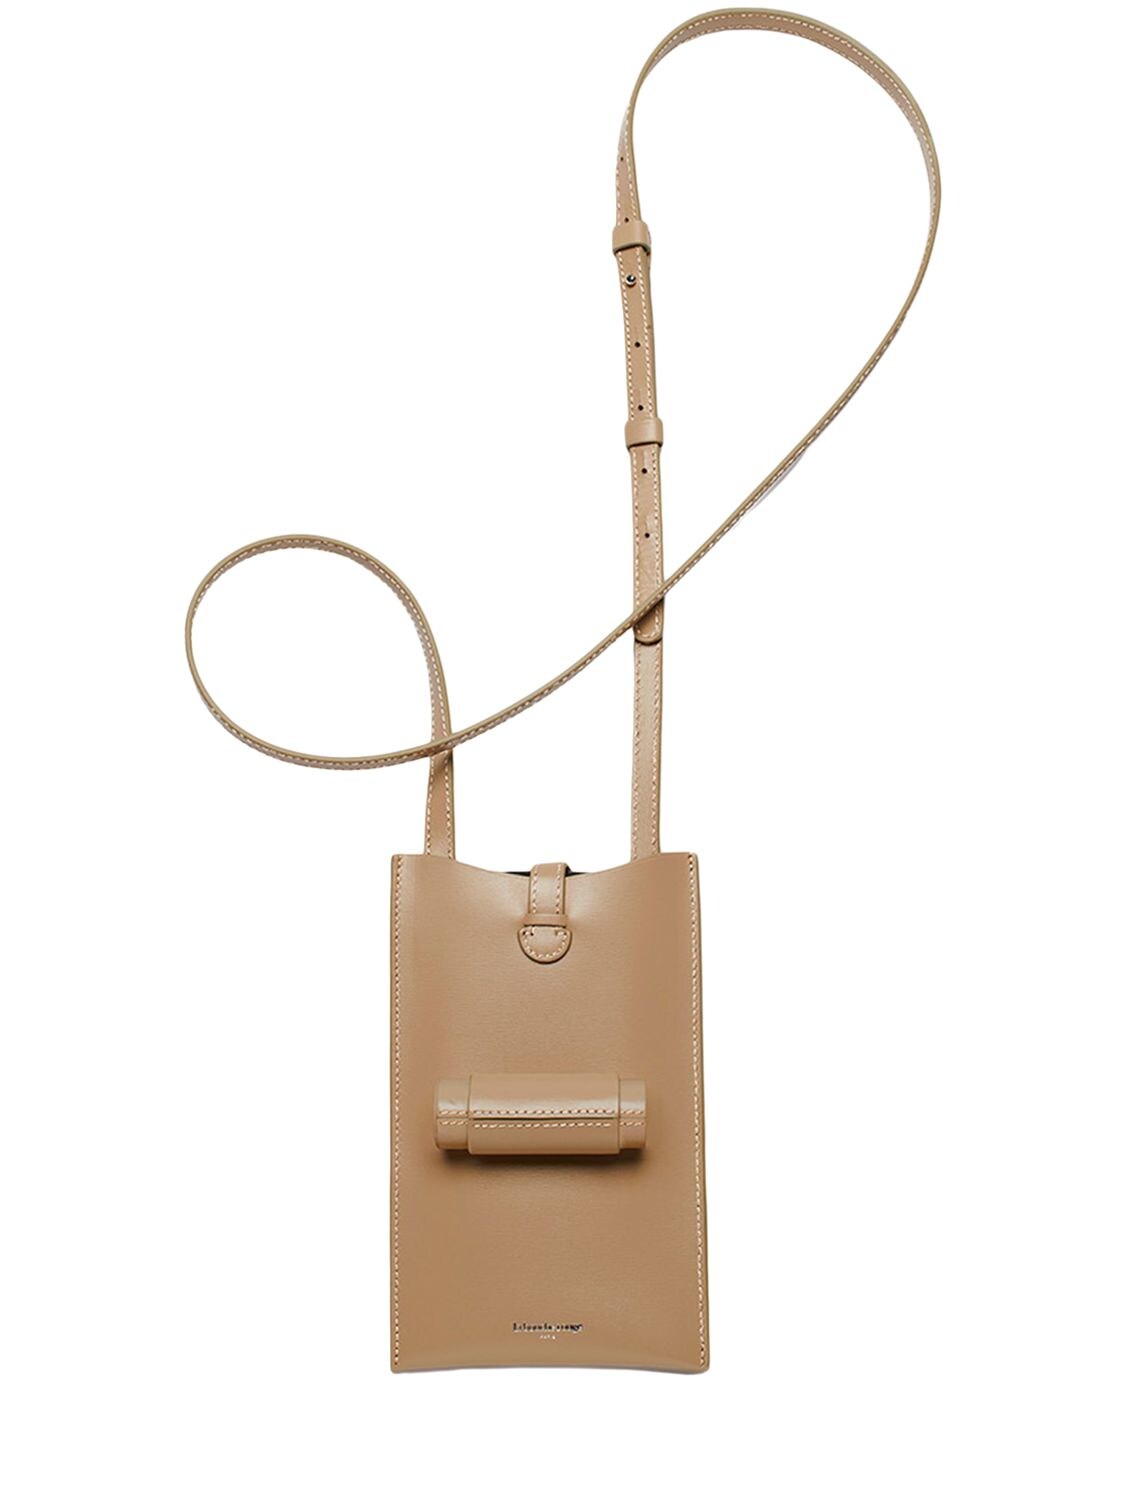 Image of The Camel 21 Bag